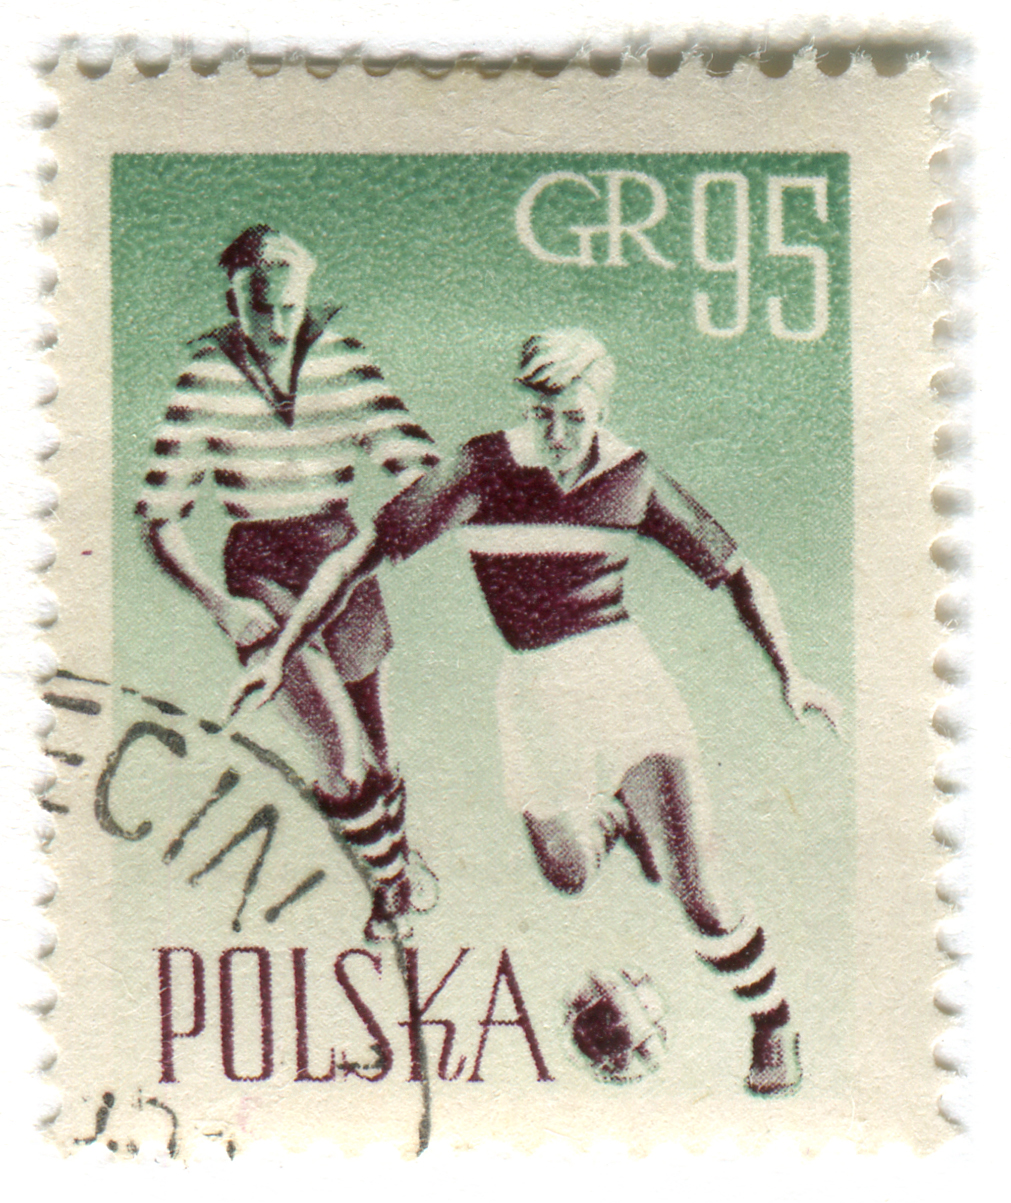 the stamp shows two men in soccer uniforms